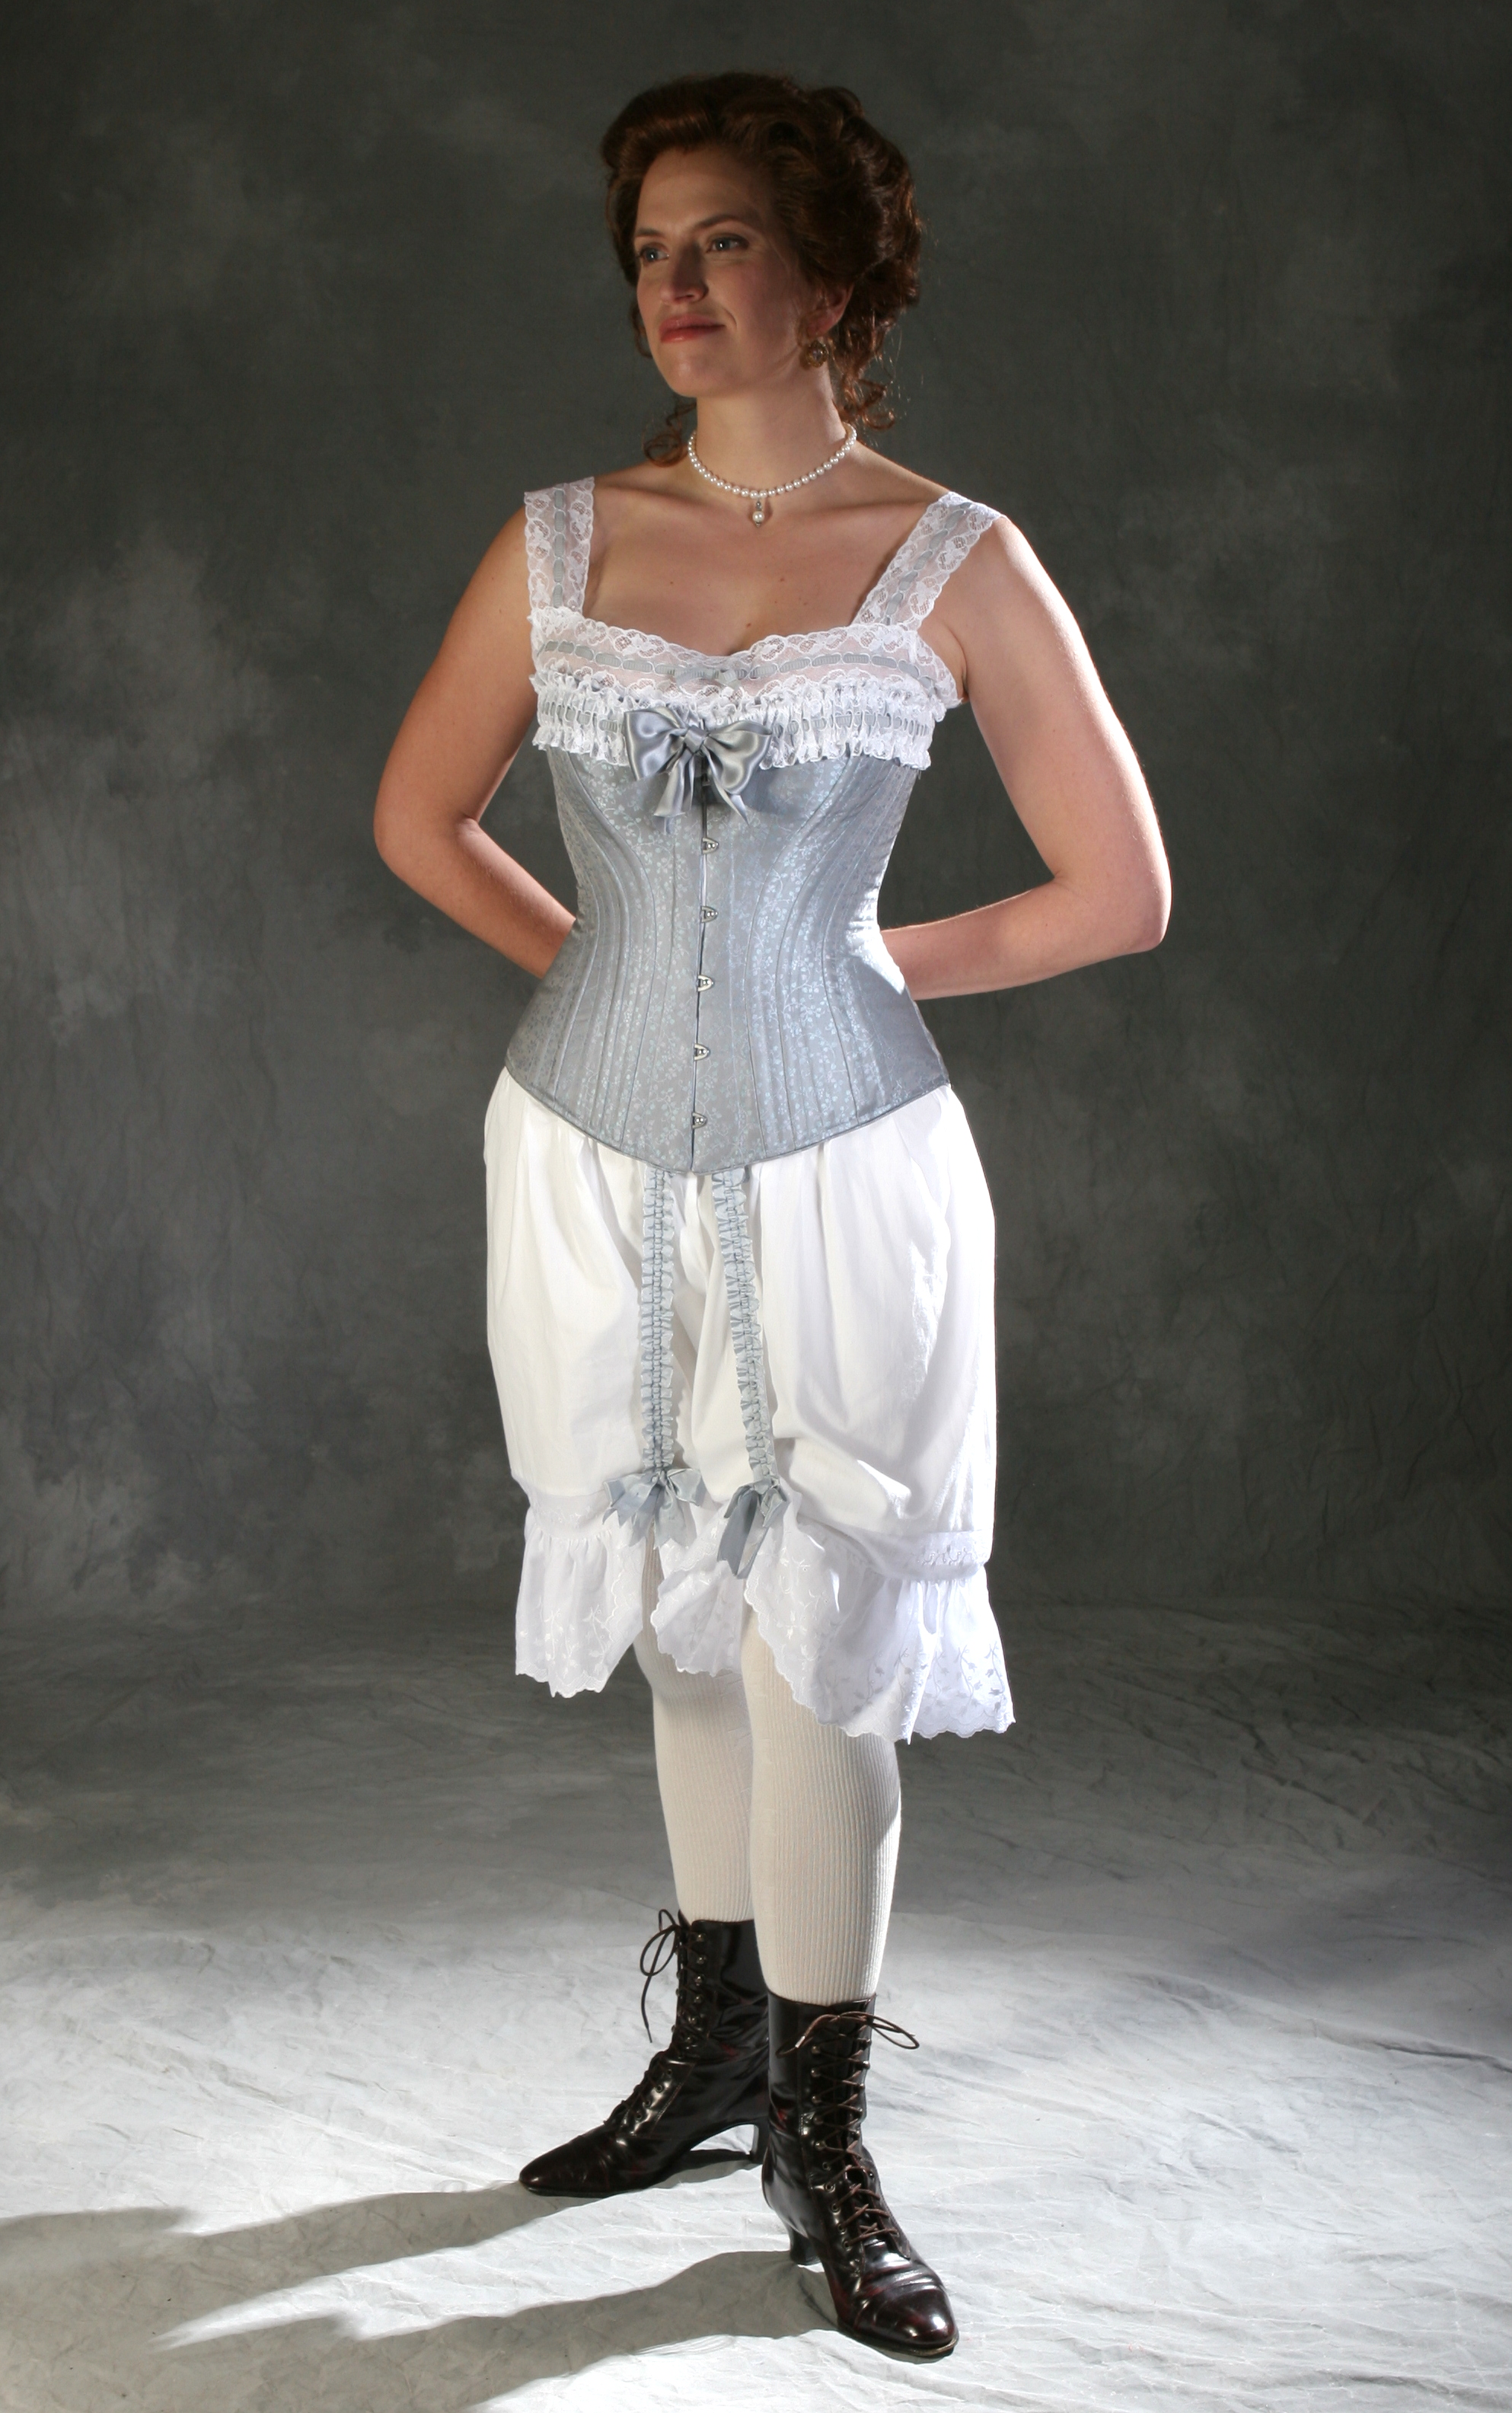 Bloomers — Period Corsets